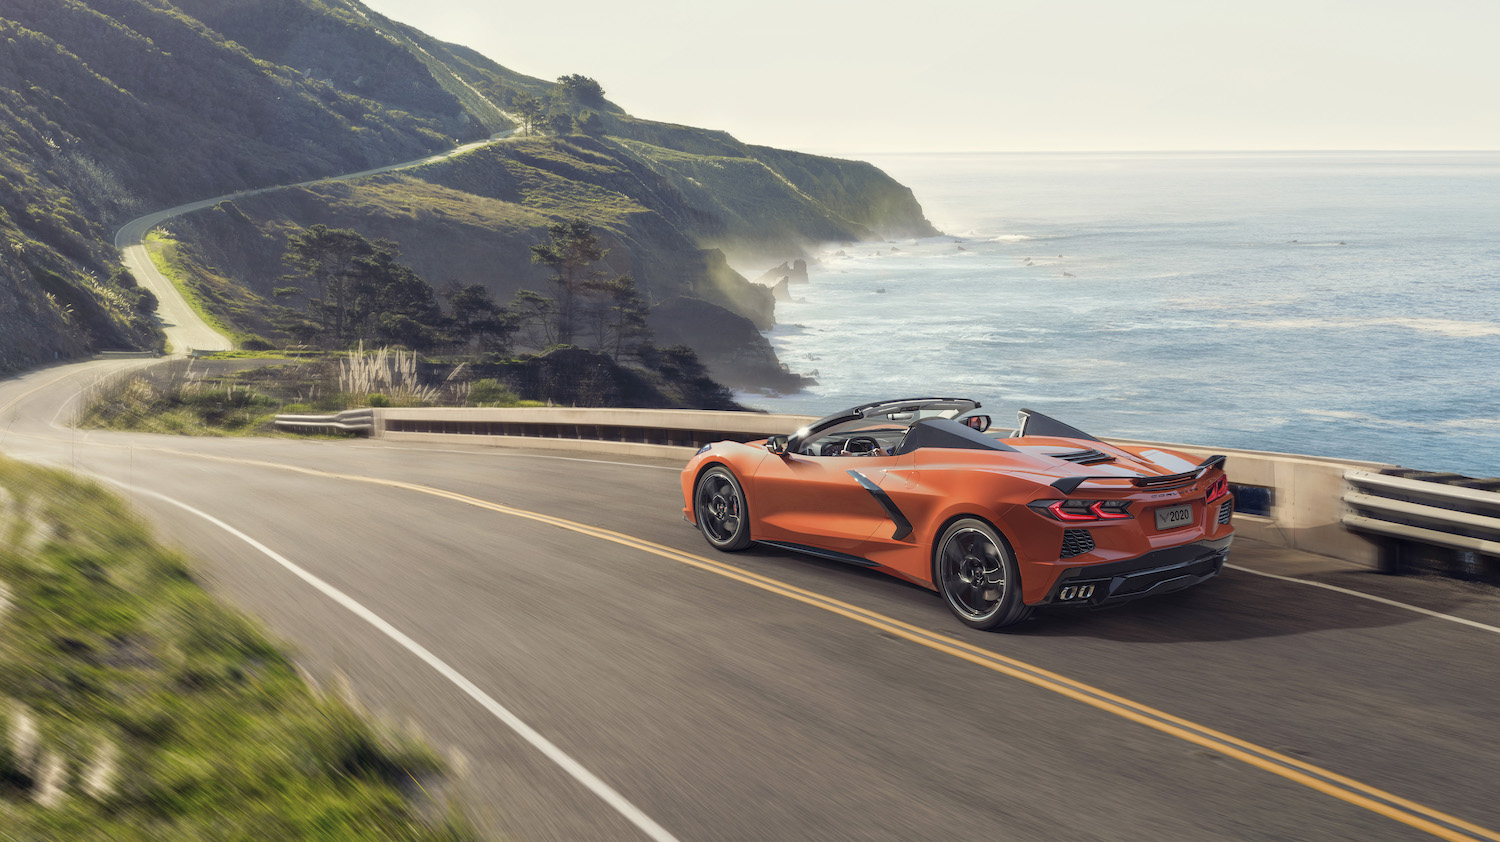 This is a convertible 2021 Corvette C8 Stingray, the first mid-engine Chevrolet supercar. | General Motors